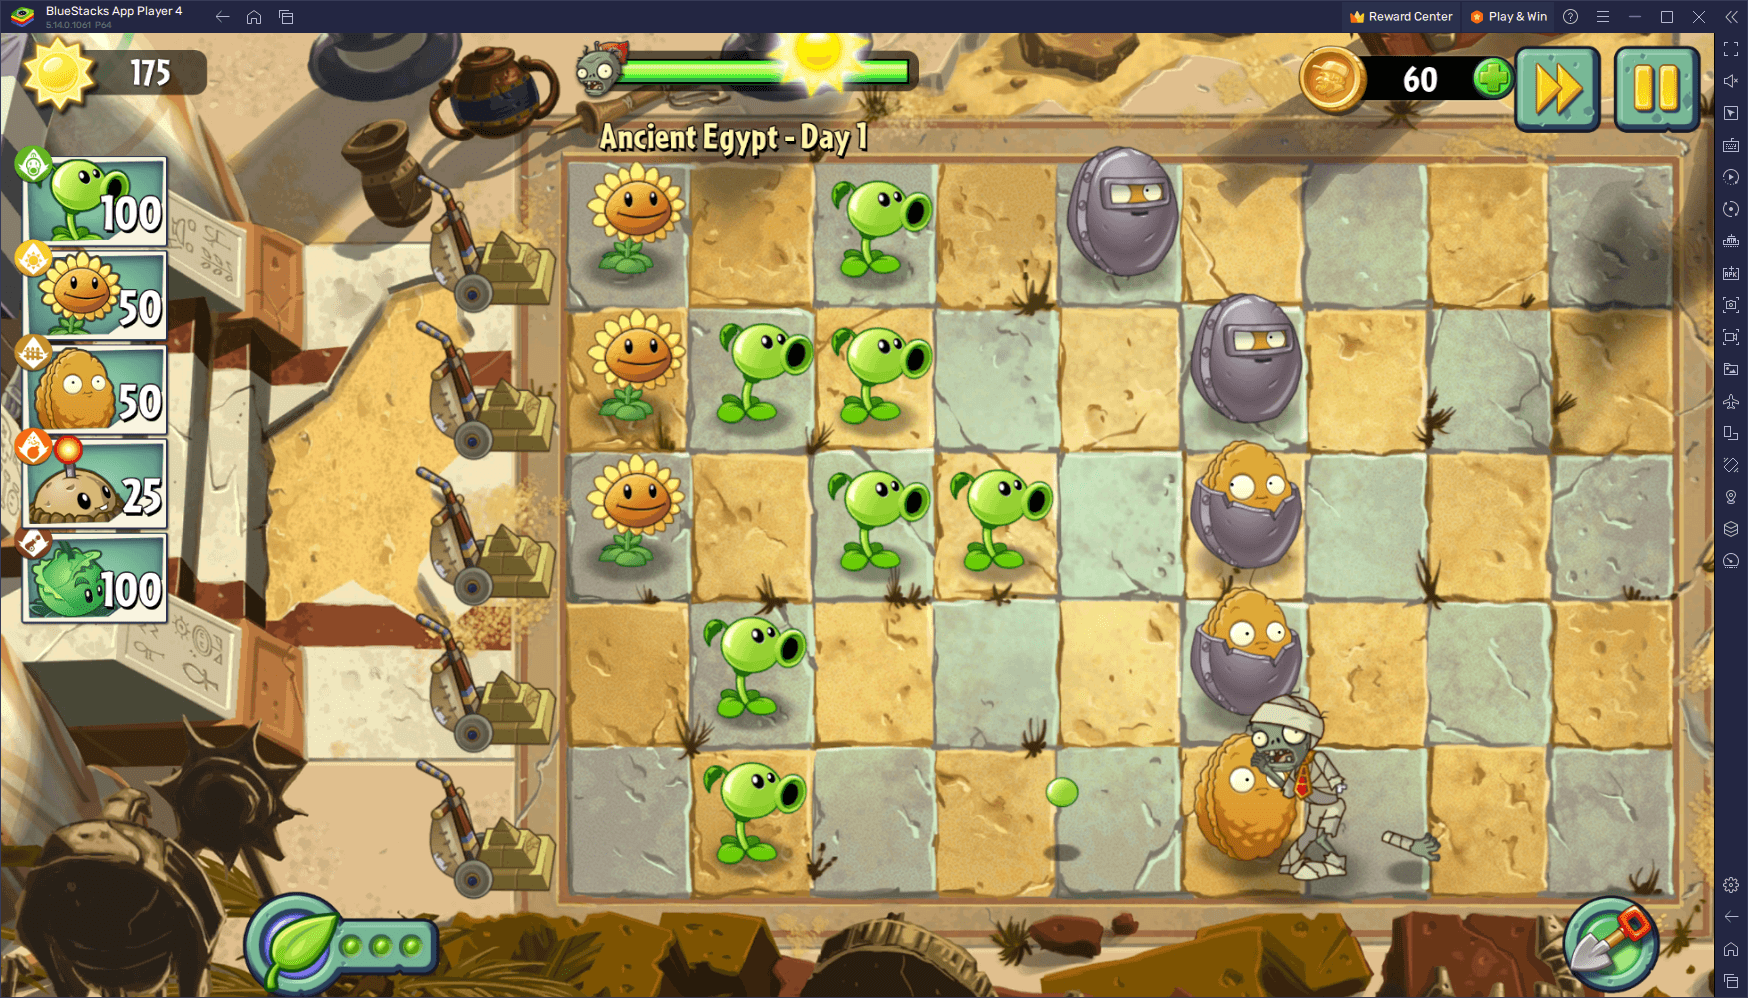 Plants vs Zombies 2 Combat Guide - Essential Tips and Tricks for Getting Started